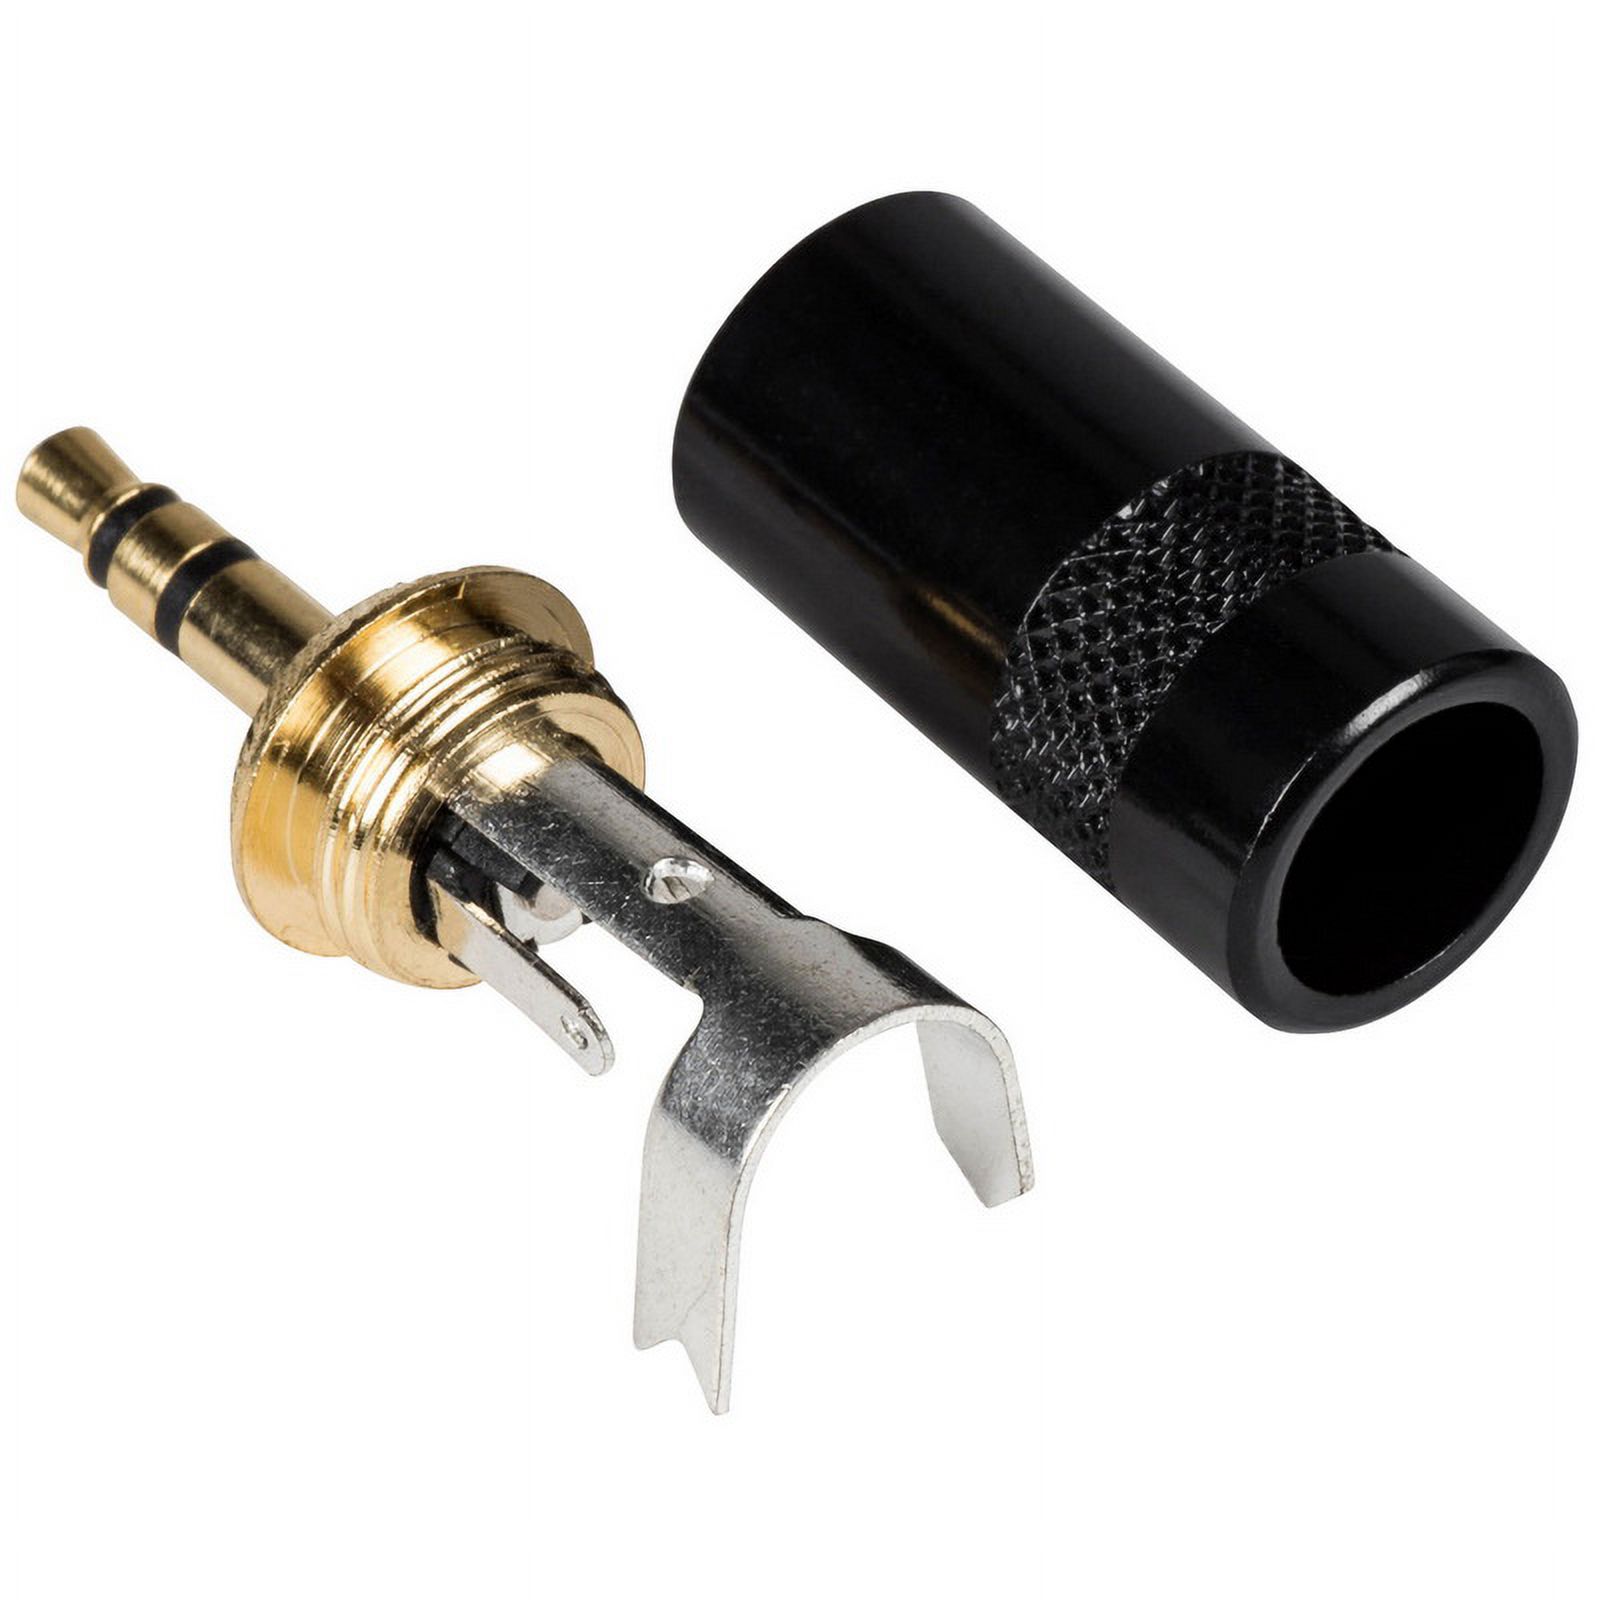 Neutrik Rean NYS231BG-LL 3.5mm Stereo Plug Connector Black with Gold Plug Large 8mm Cable Entry - image 2 of 4